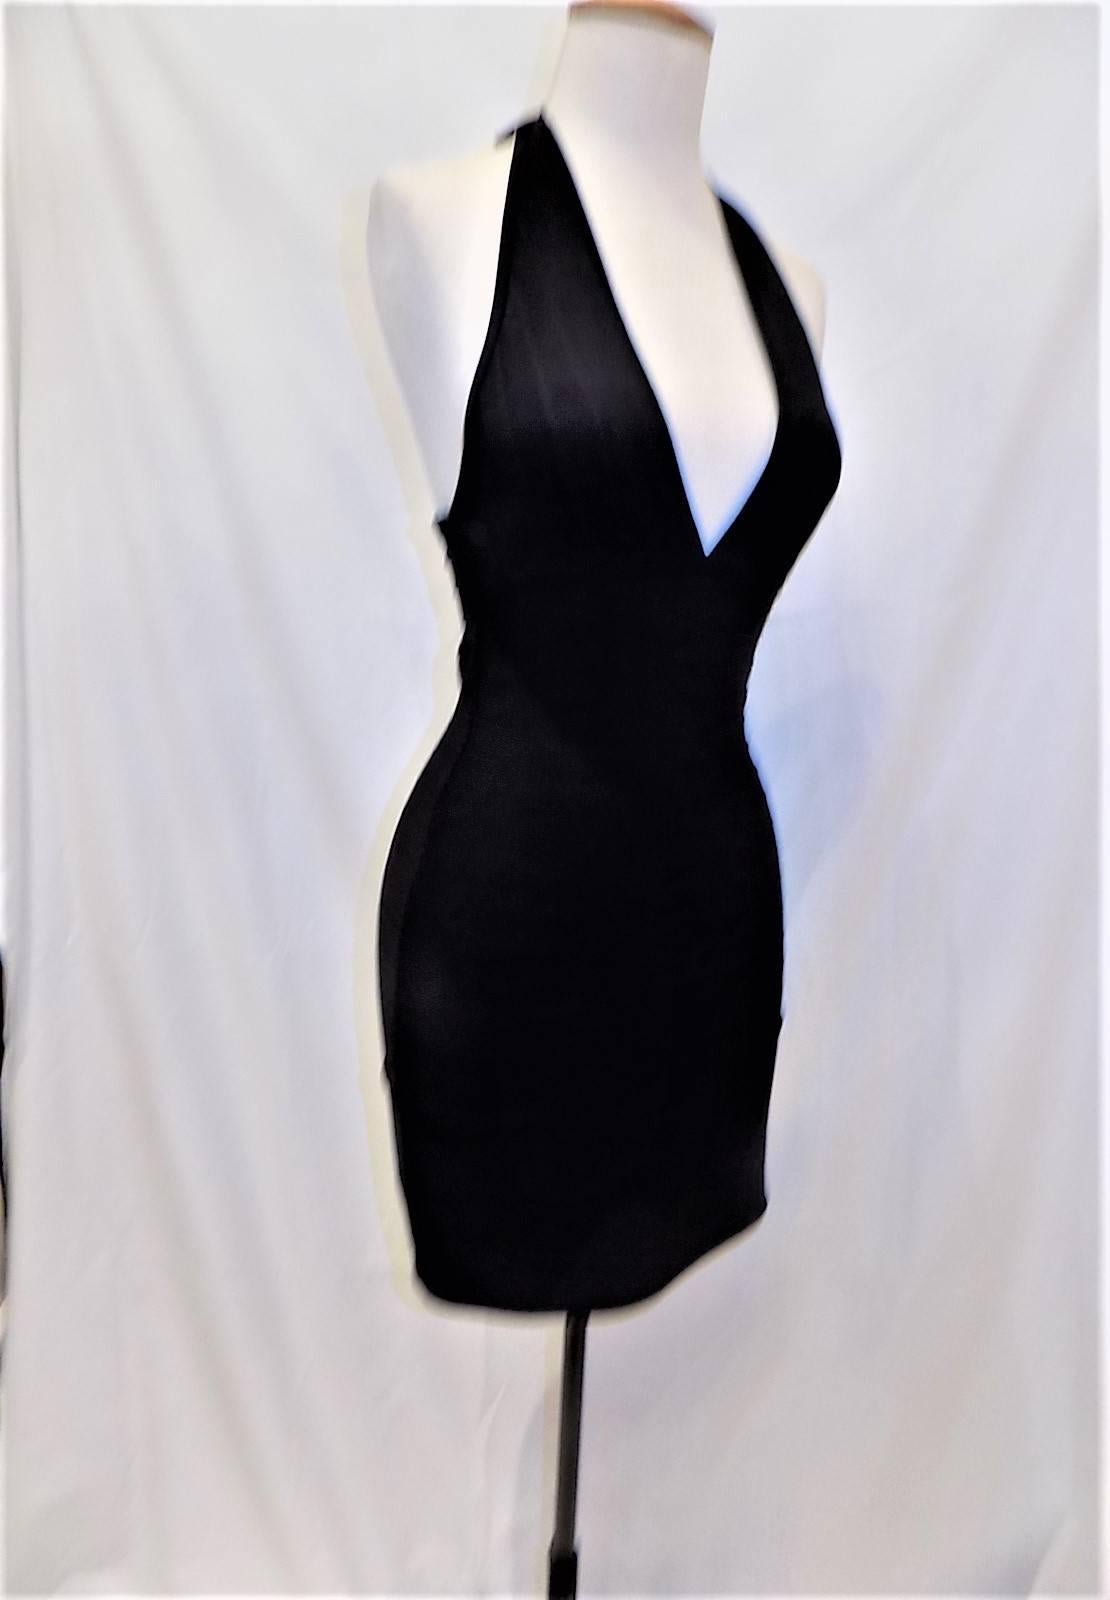 Once so fabulously made Herve Leger original black halter bandage dress with tags . Perfect seems and fabric. Tie at the neck. New never worn.  size Small
Retail Price at that time $750